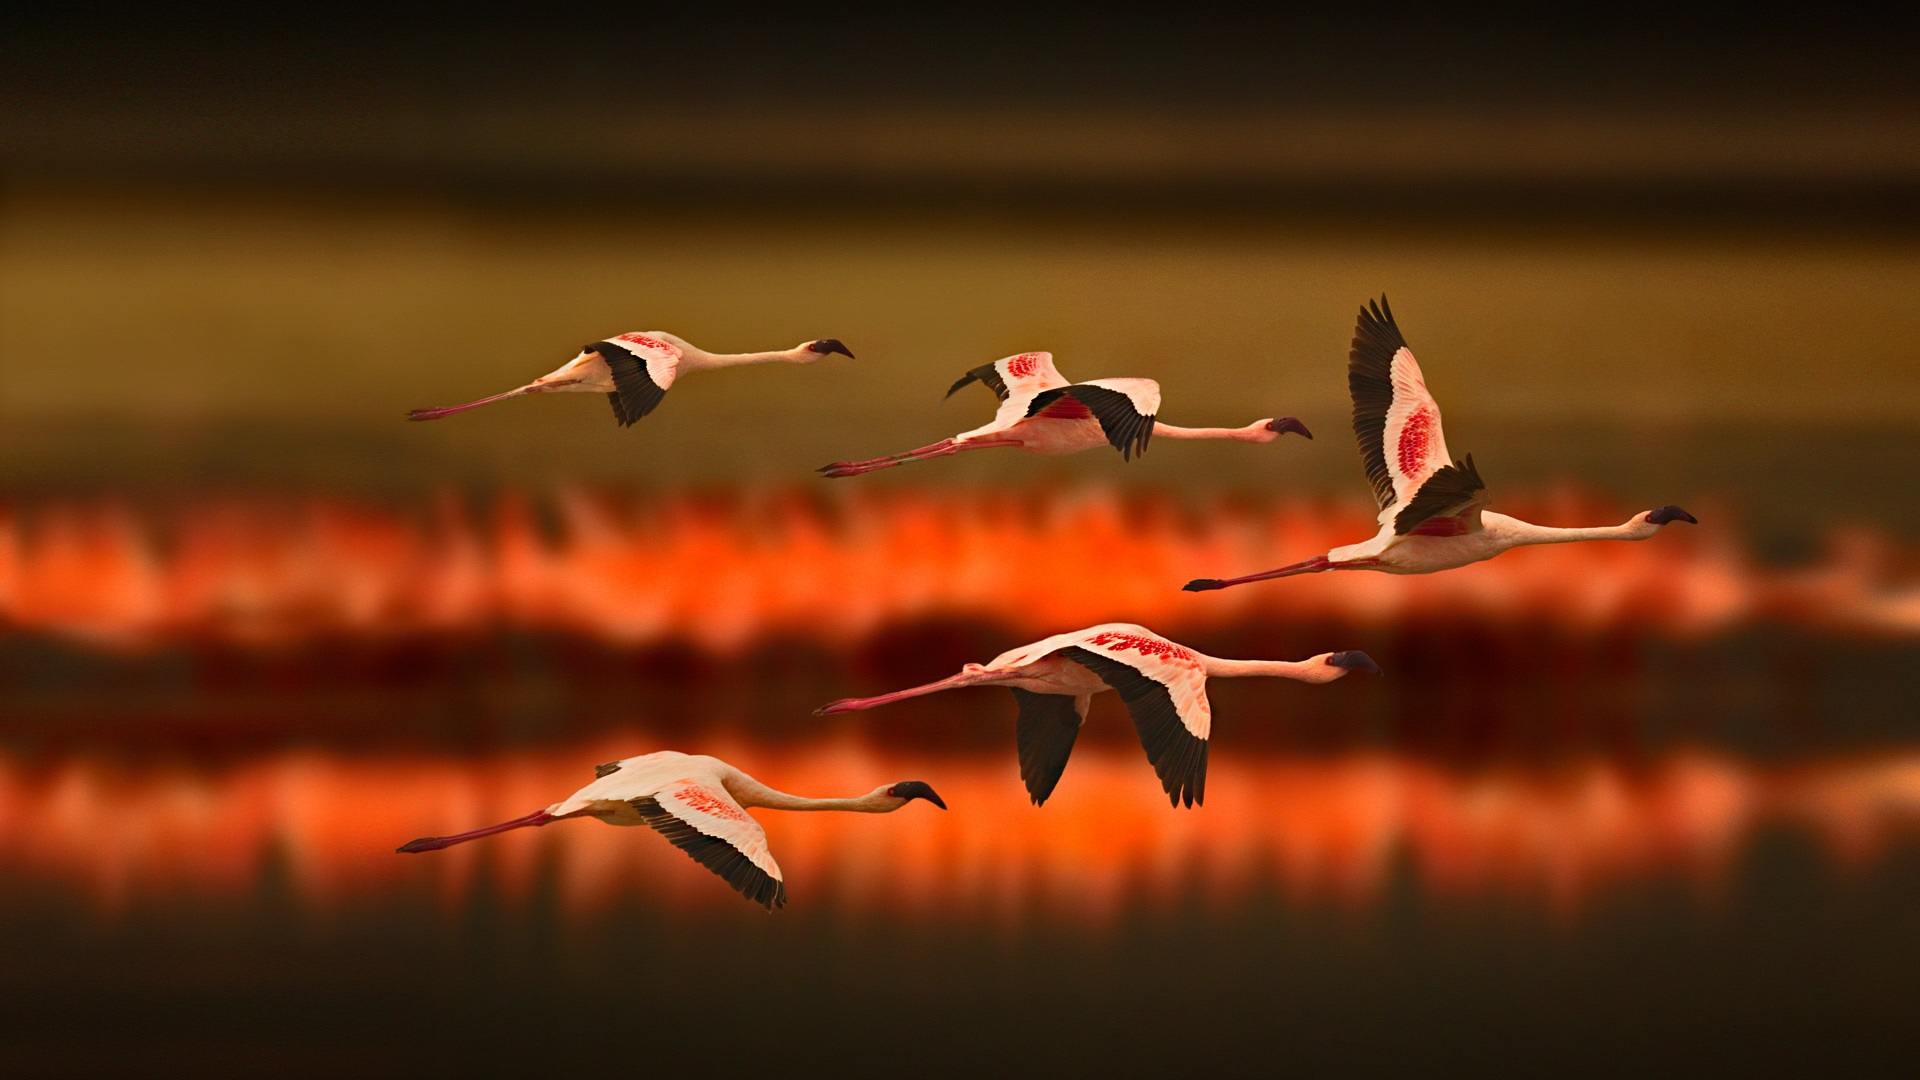 Wallpaper Greater Flamingos flying at sunset 1920x1080 Full HD 2K Picture, Image